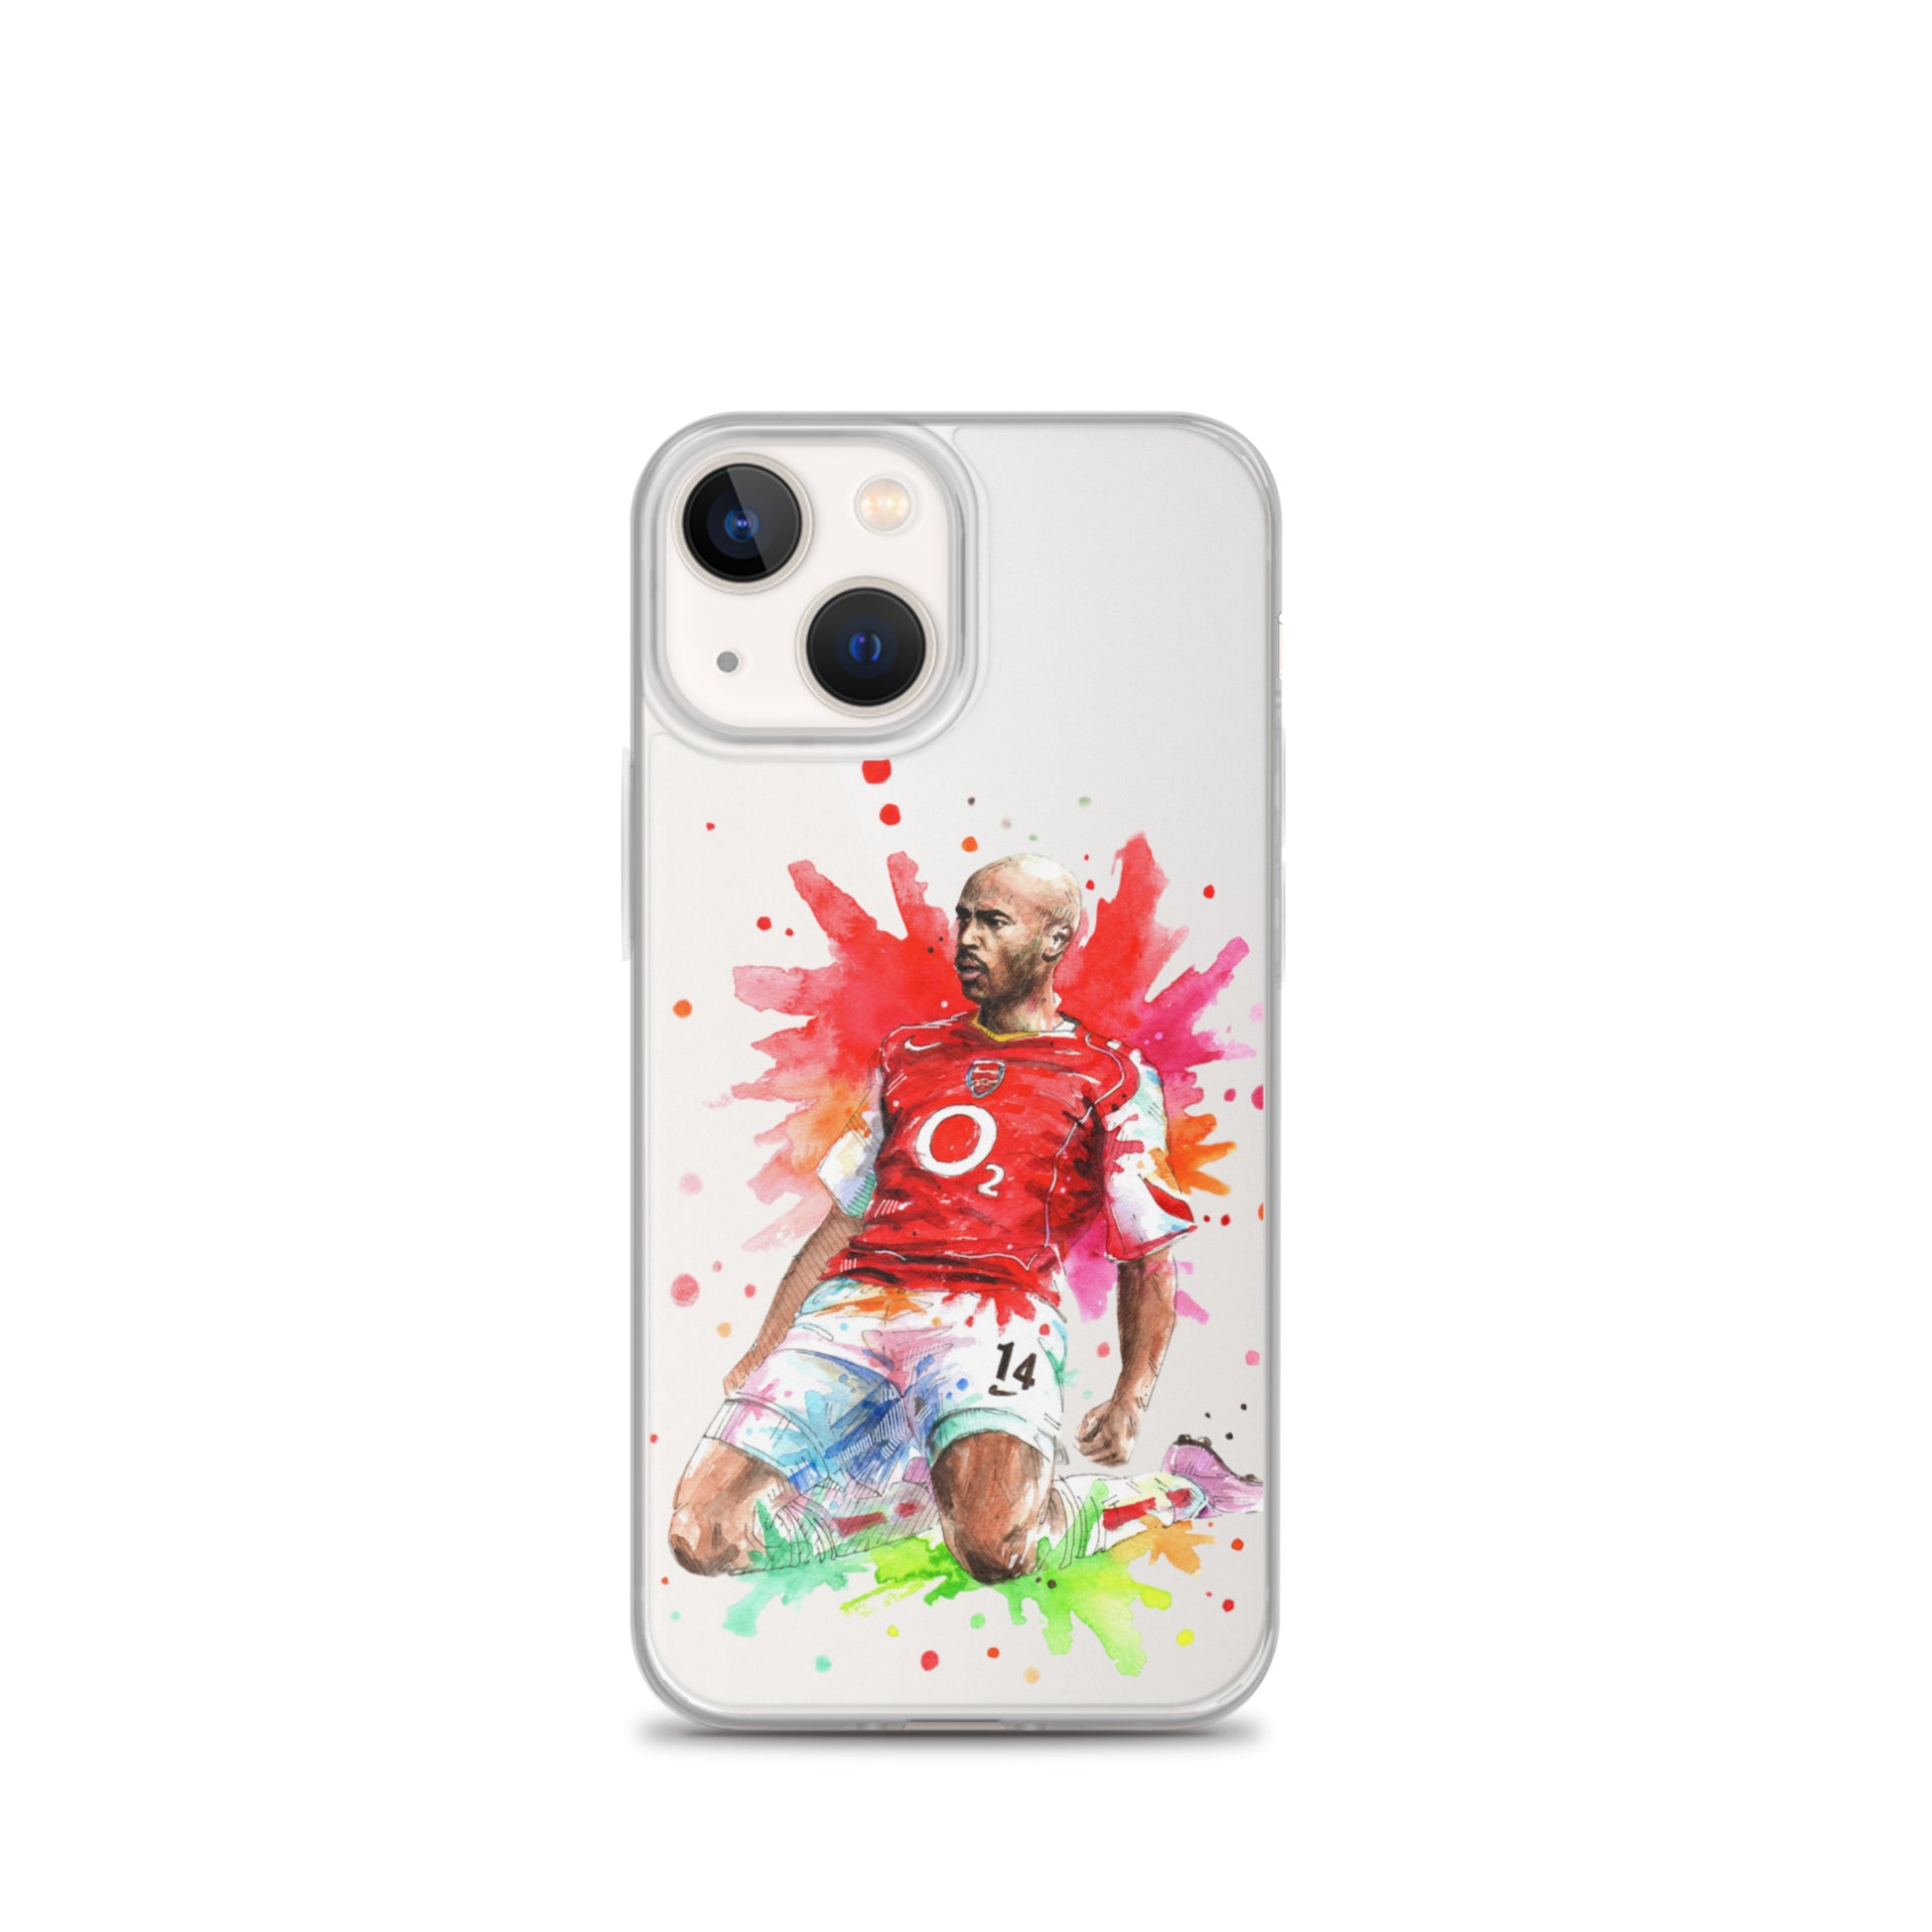 Arsenal Thierry Henry Vintage Clear Case for iPhone® - The 90+ Minute